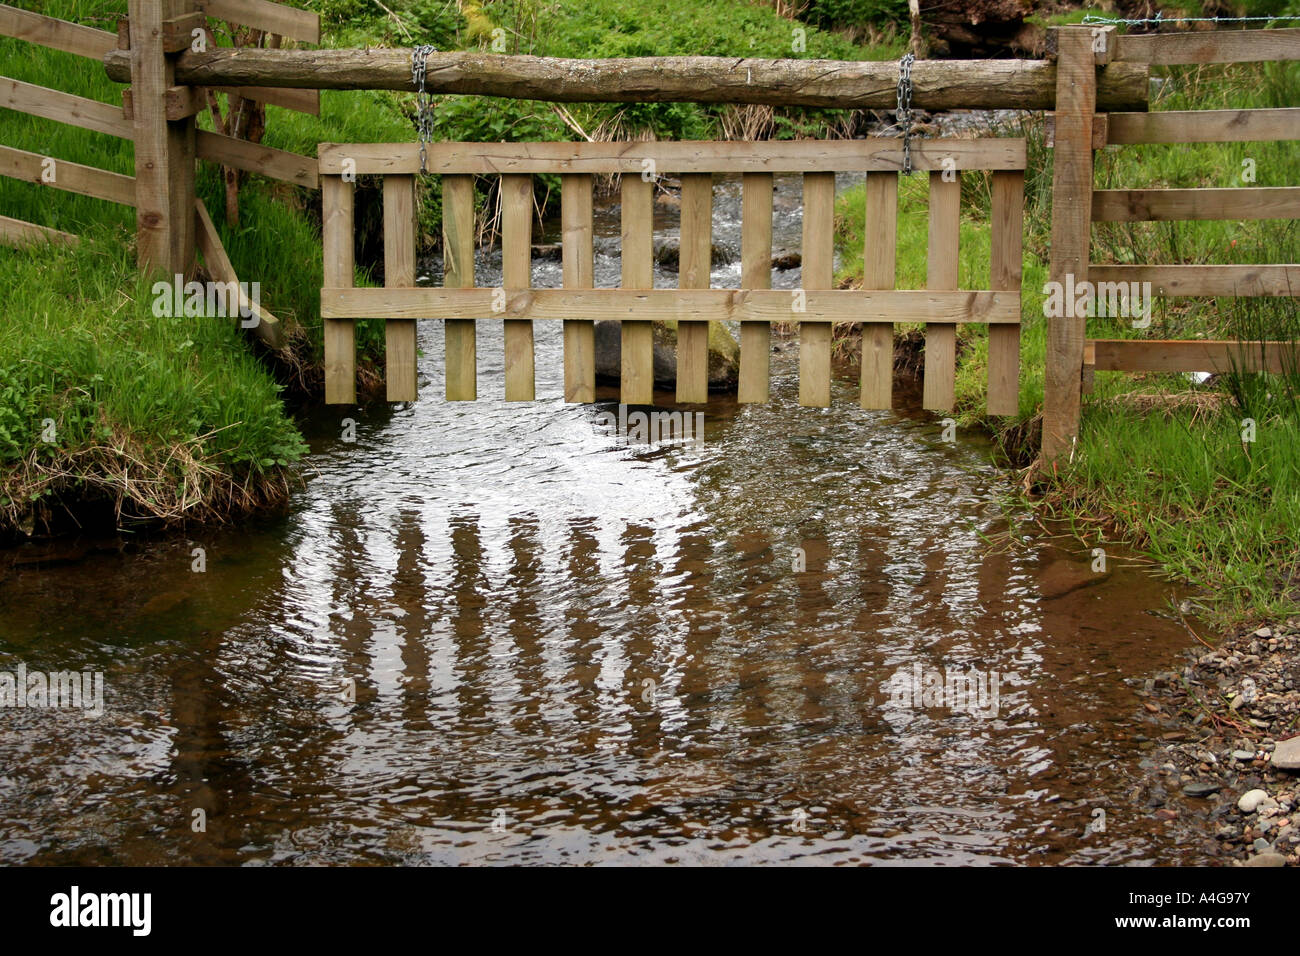 Wooden fence over water stream rivulet in Scottish rural countryside Stock Photo